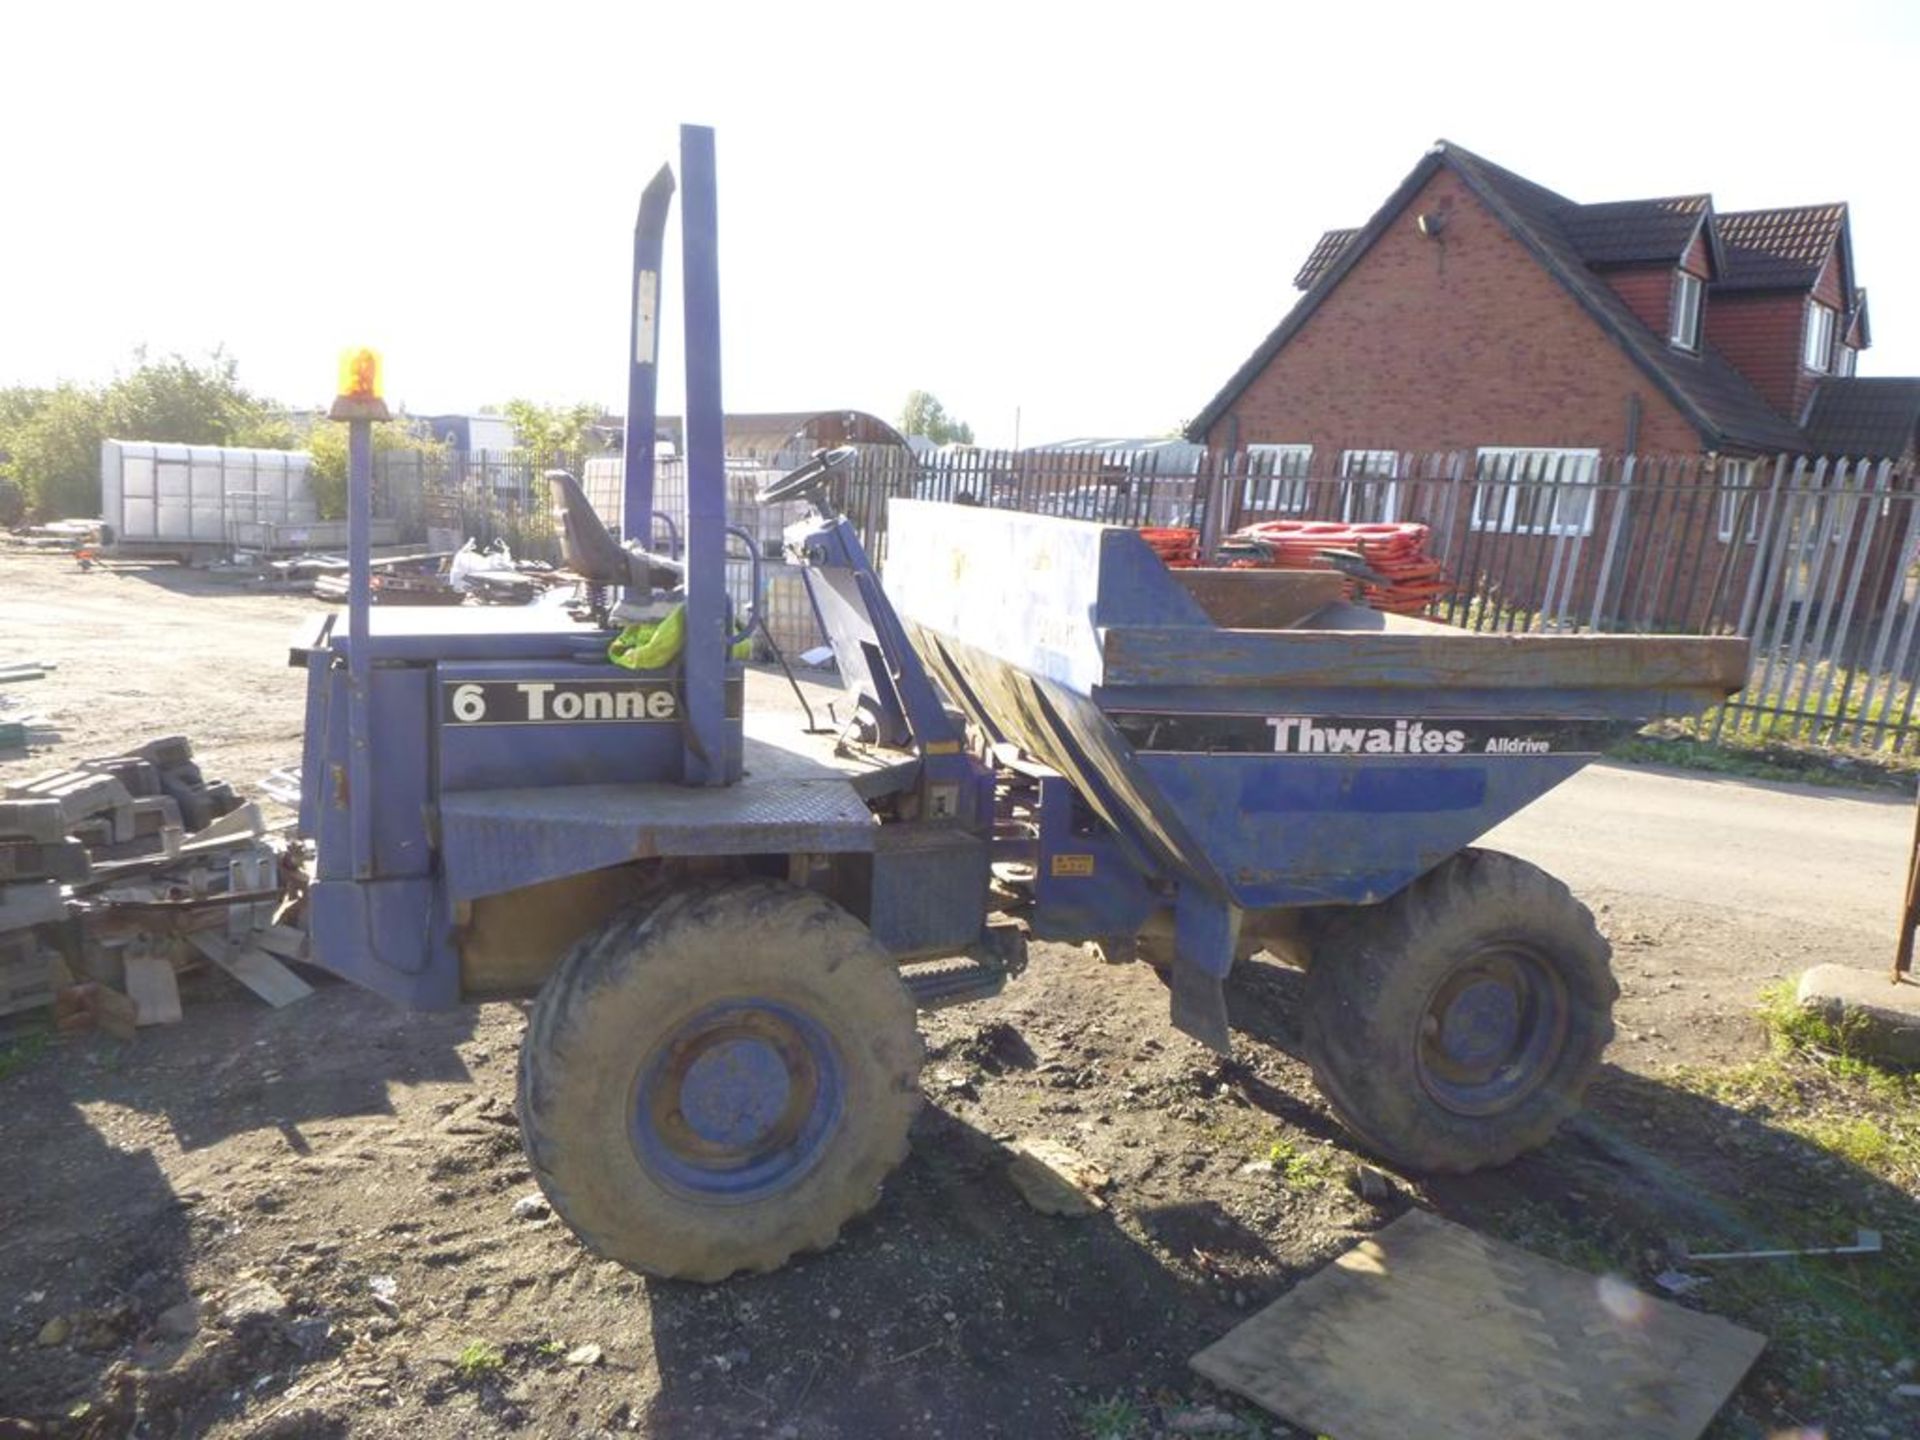 * Thwaites Type Mach 060/3 6 Tonnes All Drive Articulated Dumper Truck - Image 3 of 5